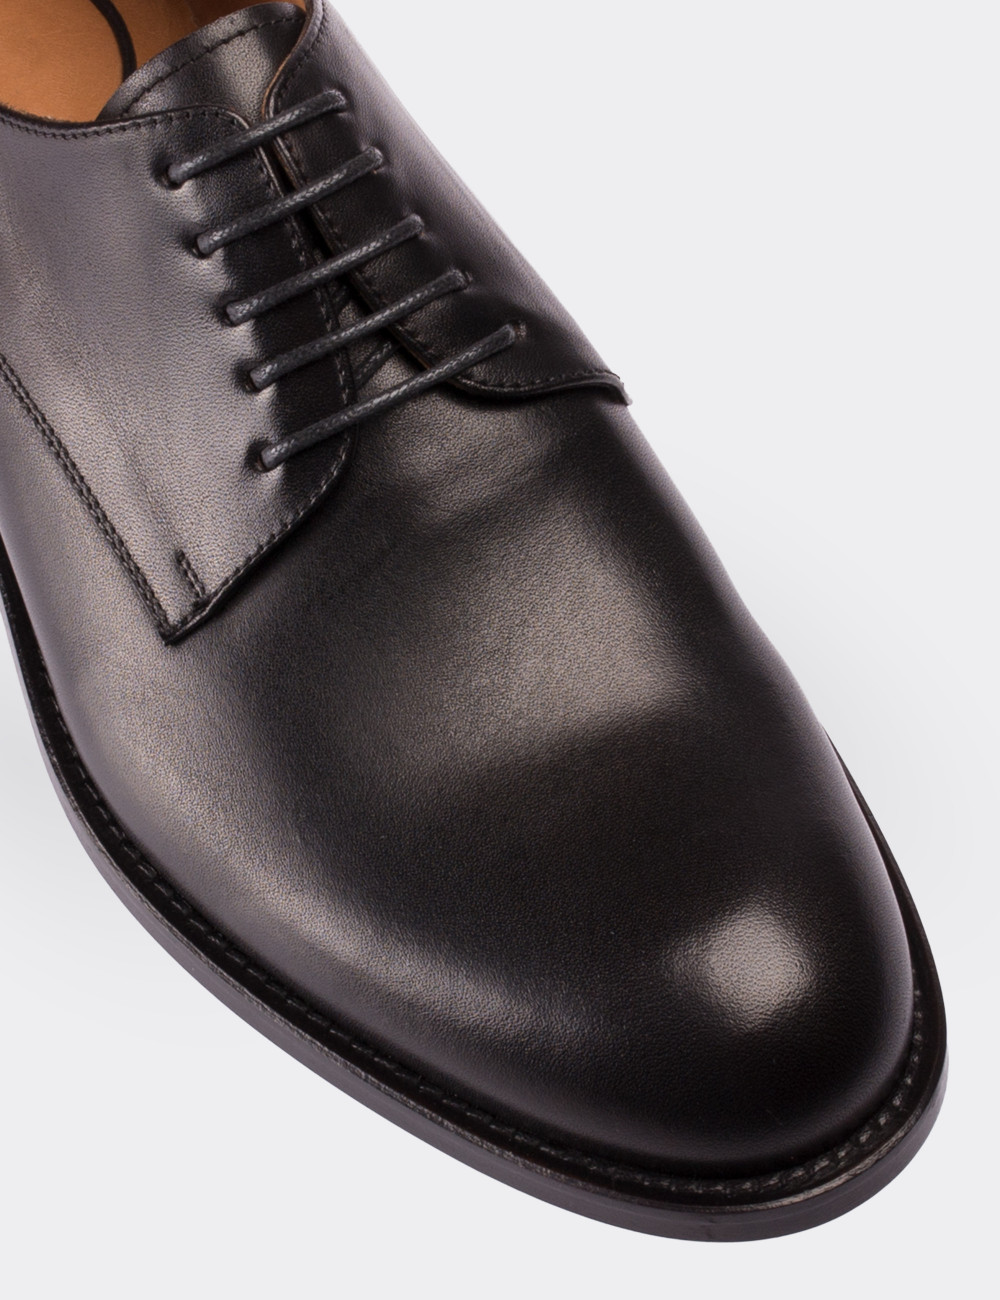 Black  Leather Classic Shoes - 64910MSYHN01